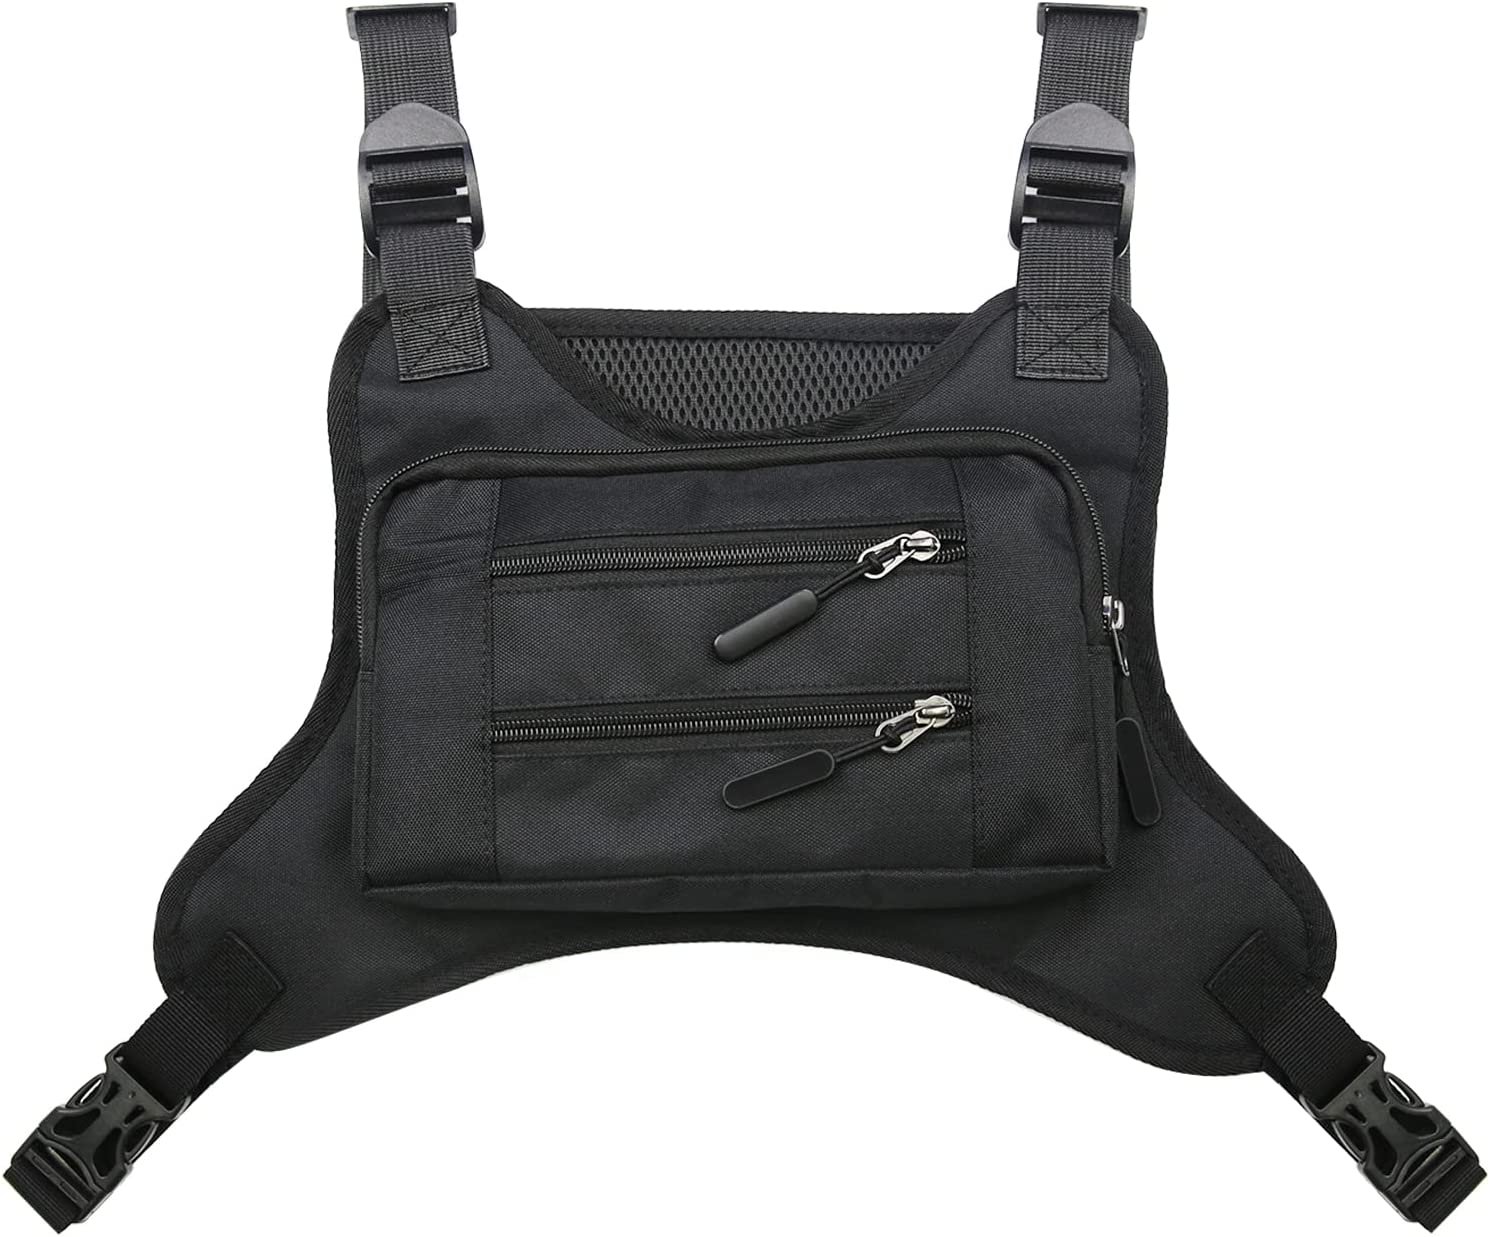 Sports & Outdoors, Running chest rig WholeSale - Price List, Bulk Buy at